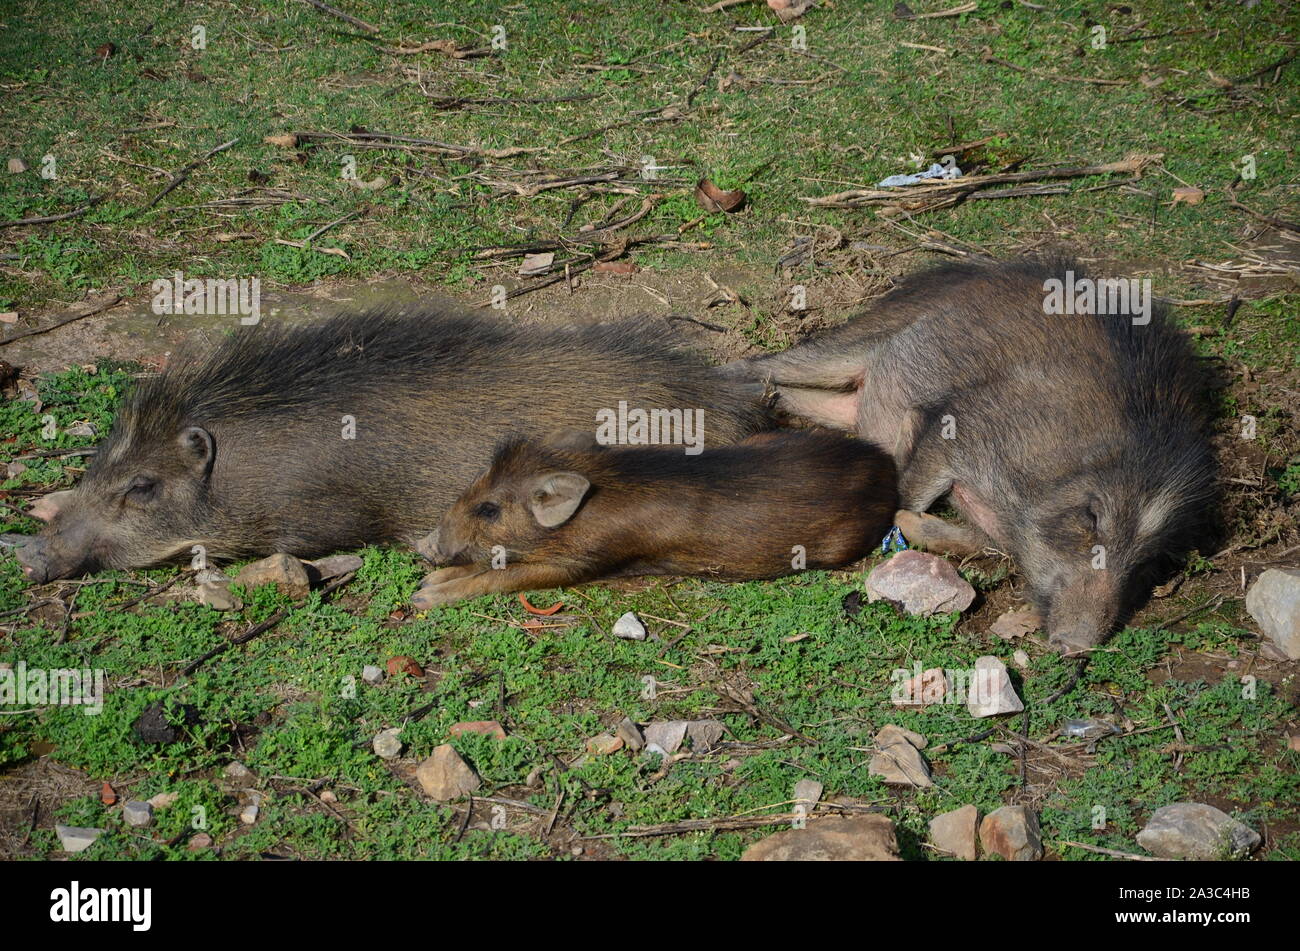 Sleeping boar family on the grass Stock Photo